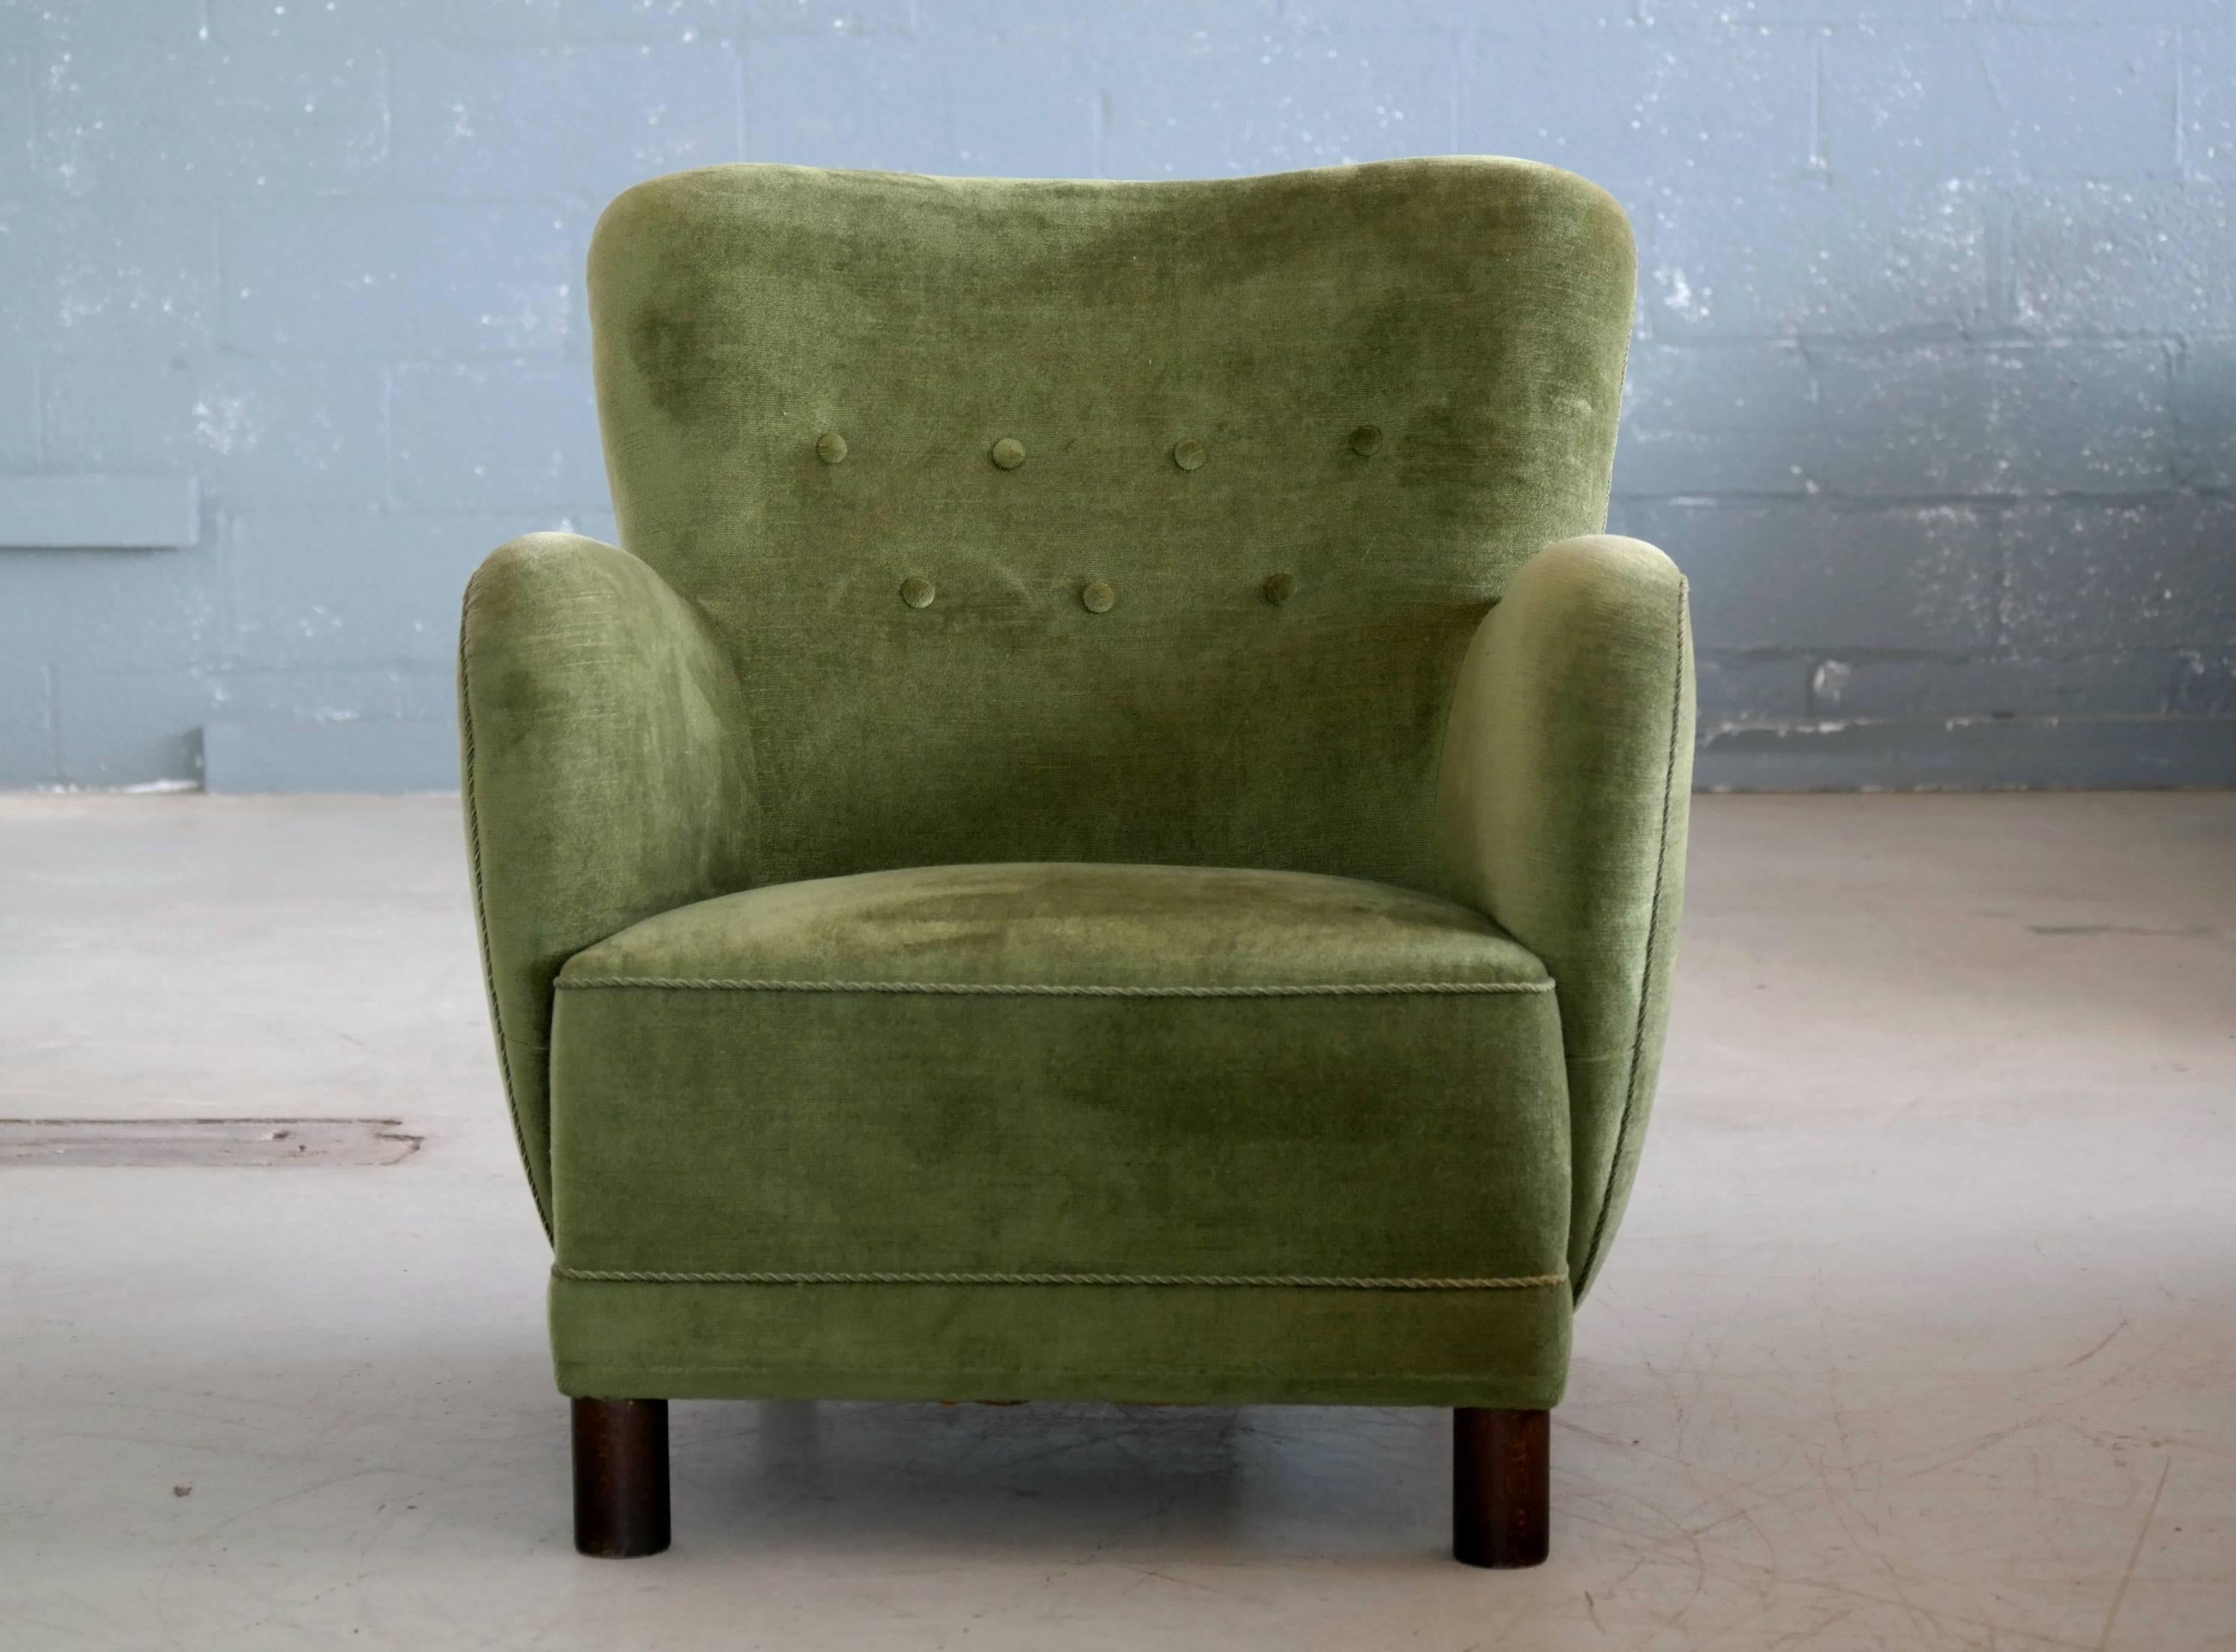 Rare to find Mogens Lassen attributed lounge chair from the 1940s featuring the rounded armrest design and the cylindrical front legs that are very characteristic of Lassen. This chair has been re-upholstered and refurbished at some point in a green